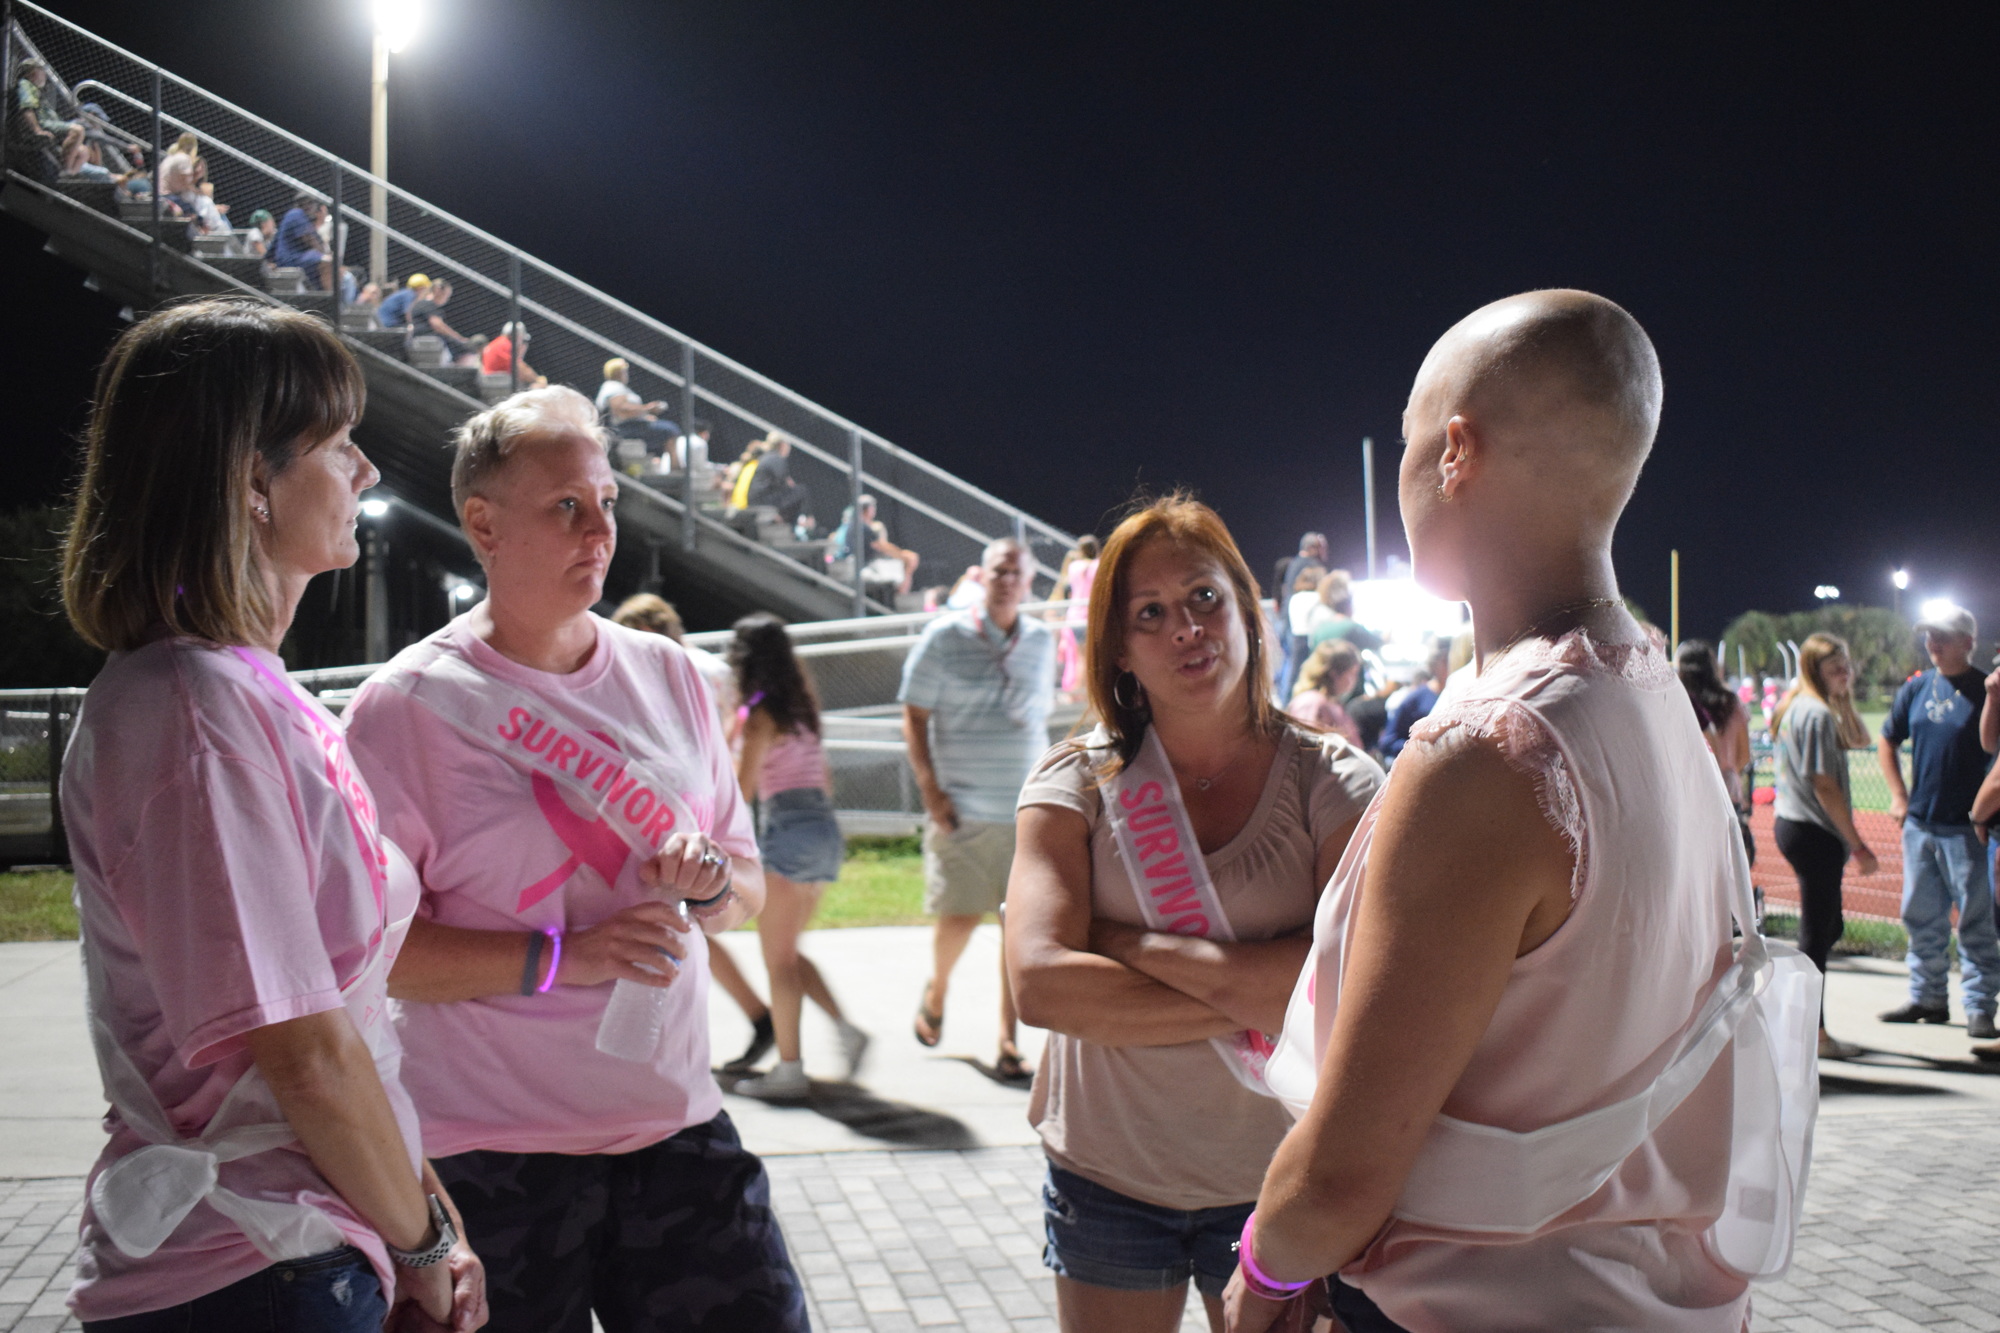 East Bradenton's Corina Geiger, Summerfield's Betsy Young, Lakewood Ranch's Giselle Ucciferri and Bradenton's Megan Yost talk about their breast cancer diagnoses, treatment and more.